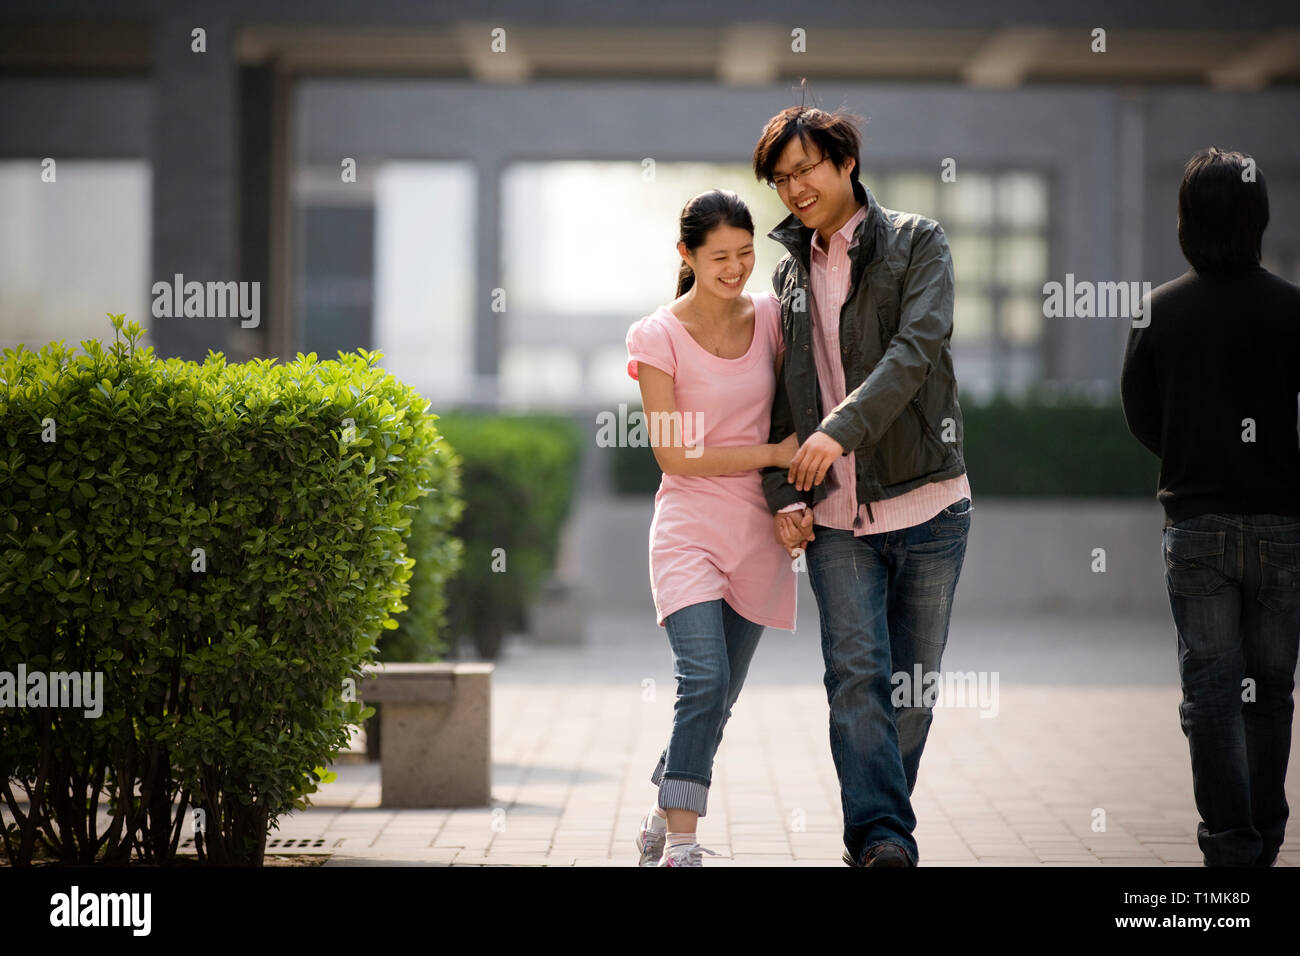 Young couple holding hands walking through a park. Stock Photo